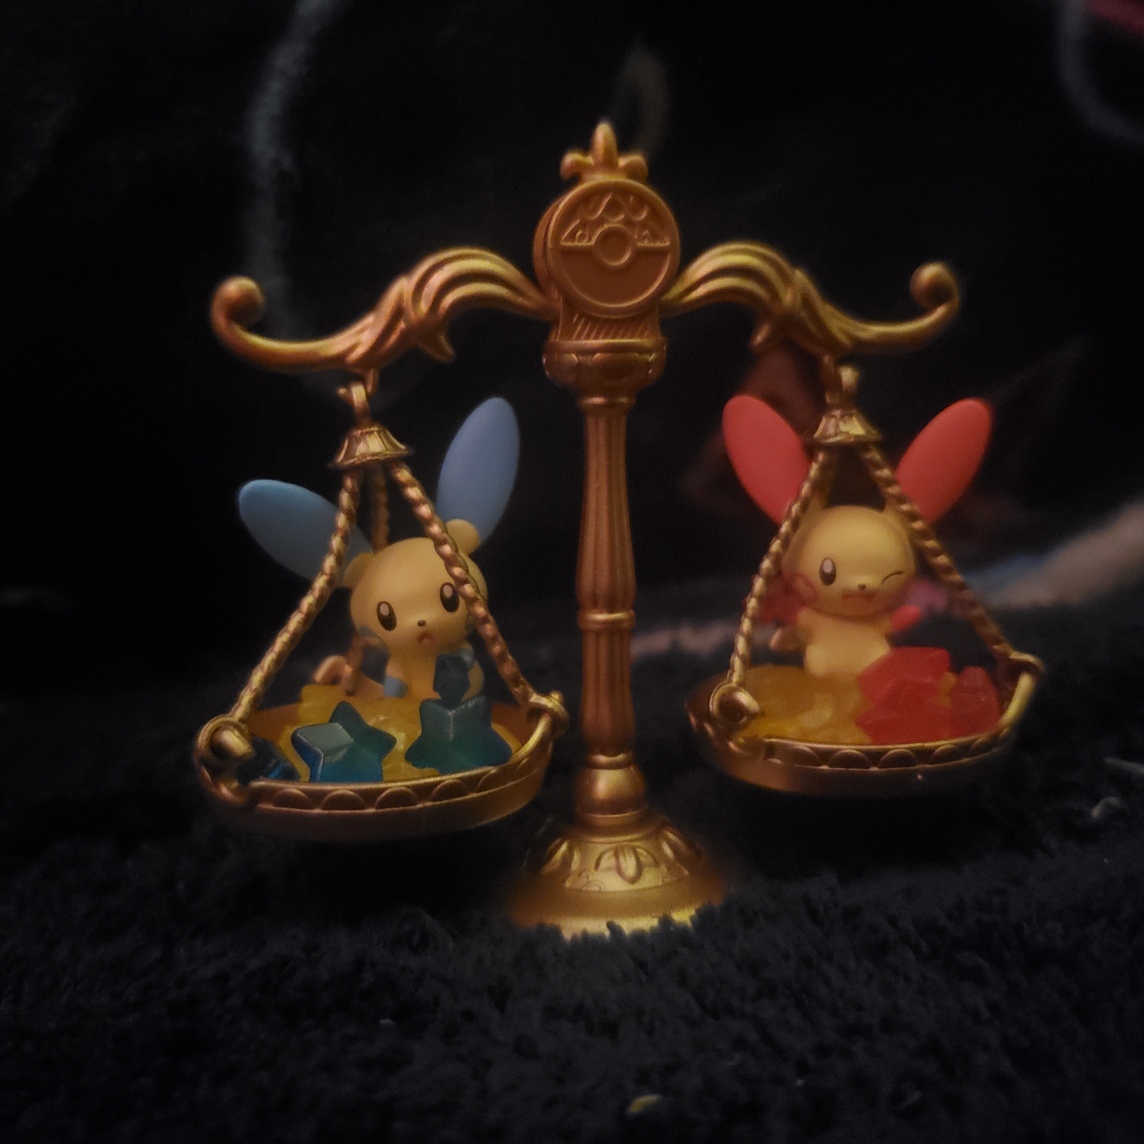 plusle and minun on tiny scales